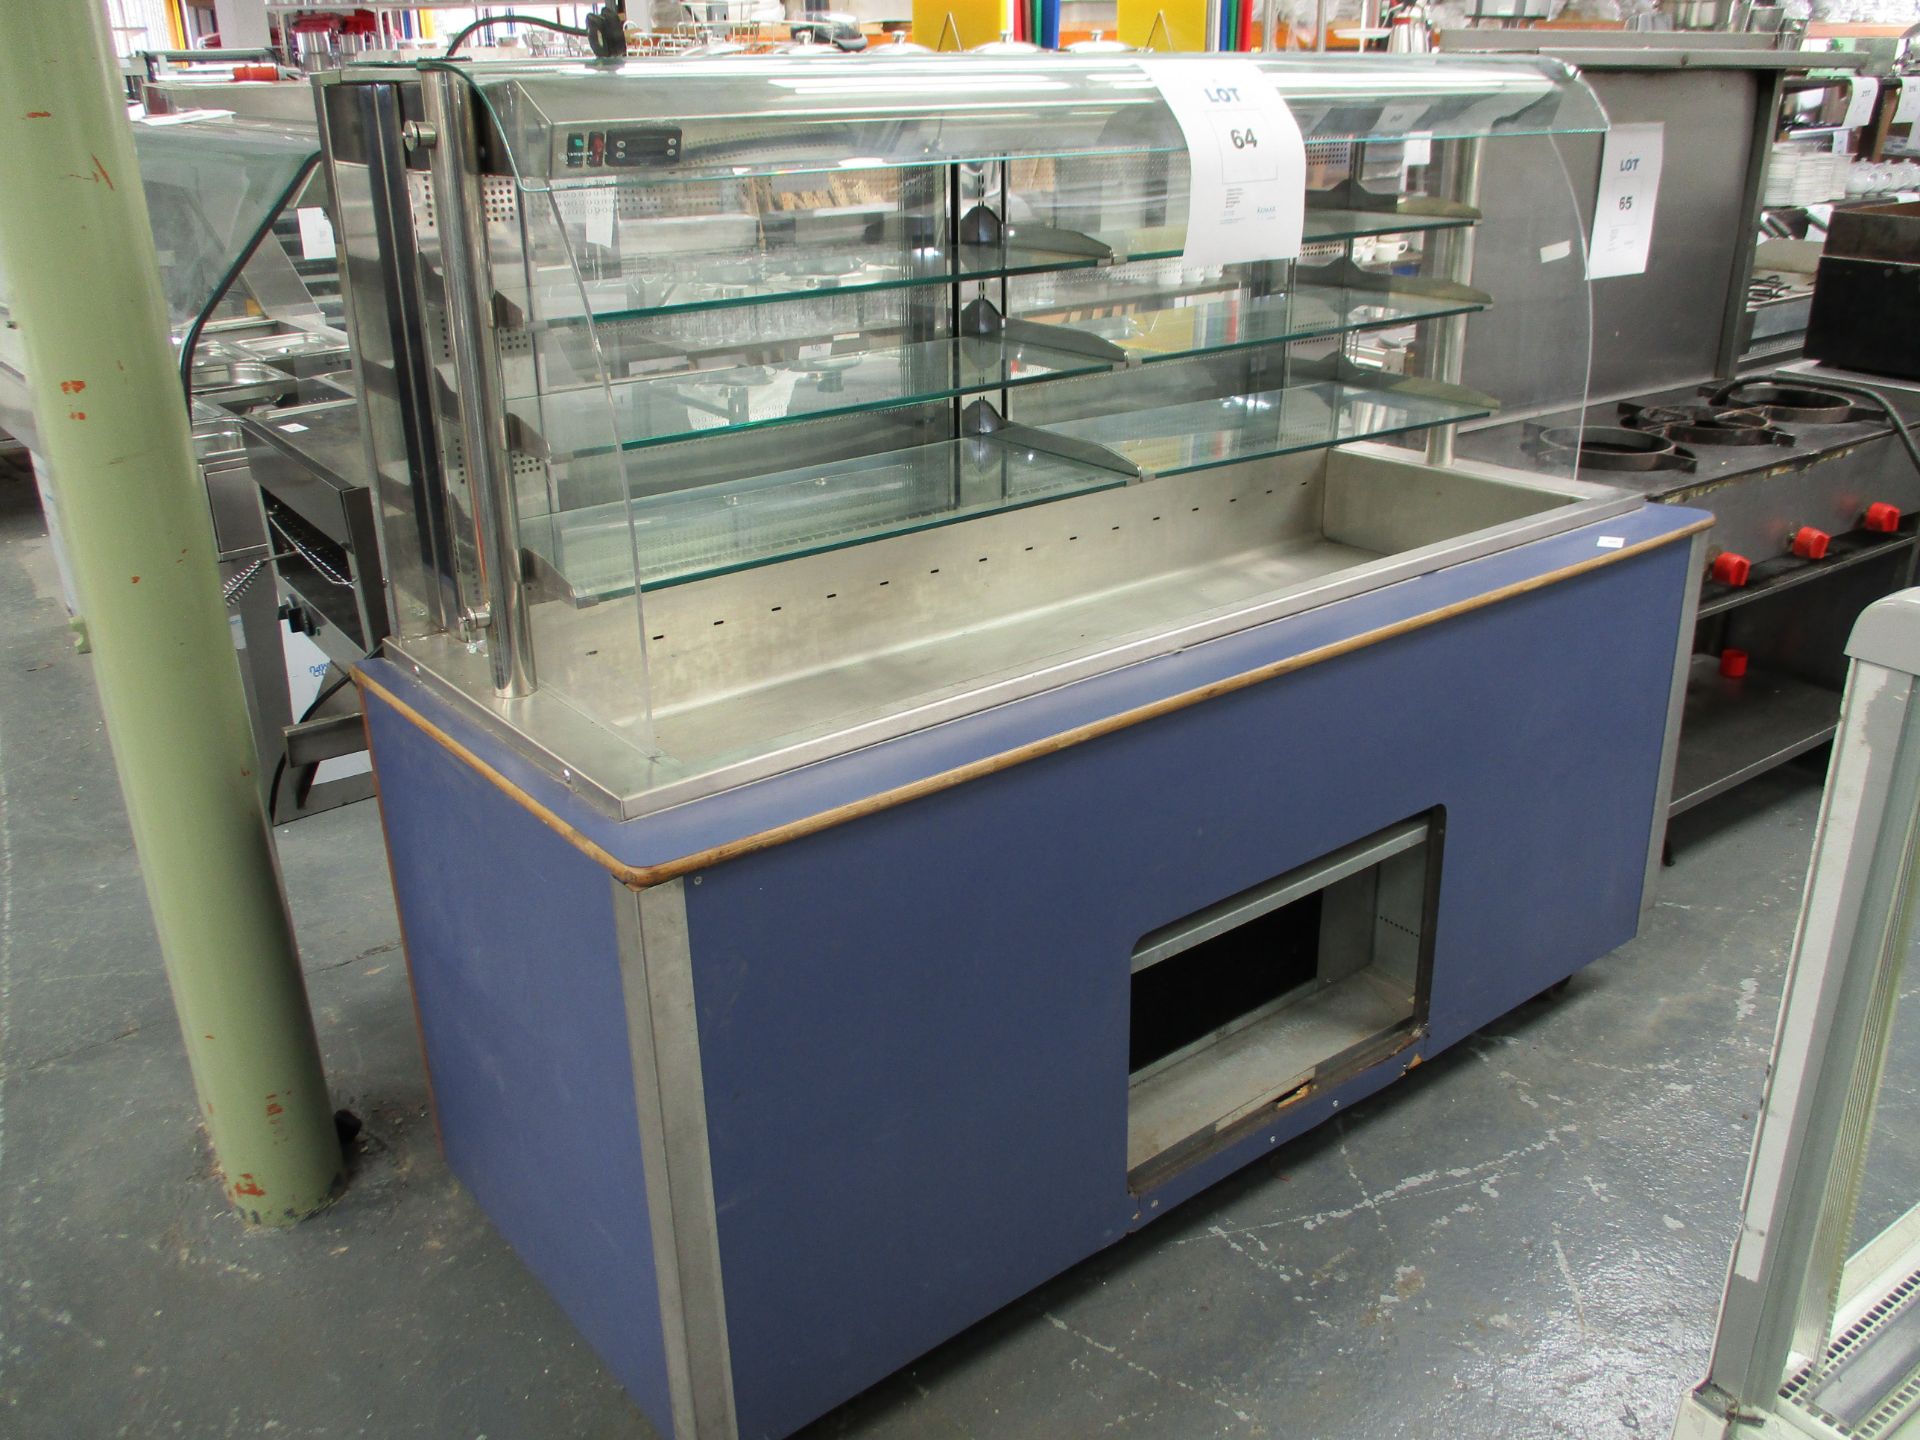 NEWCO OPEN DISPLAY UNIT REFRIDGERATED GRAB AND GO SIZE - Image 2 of 4